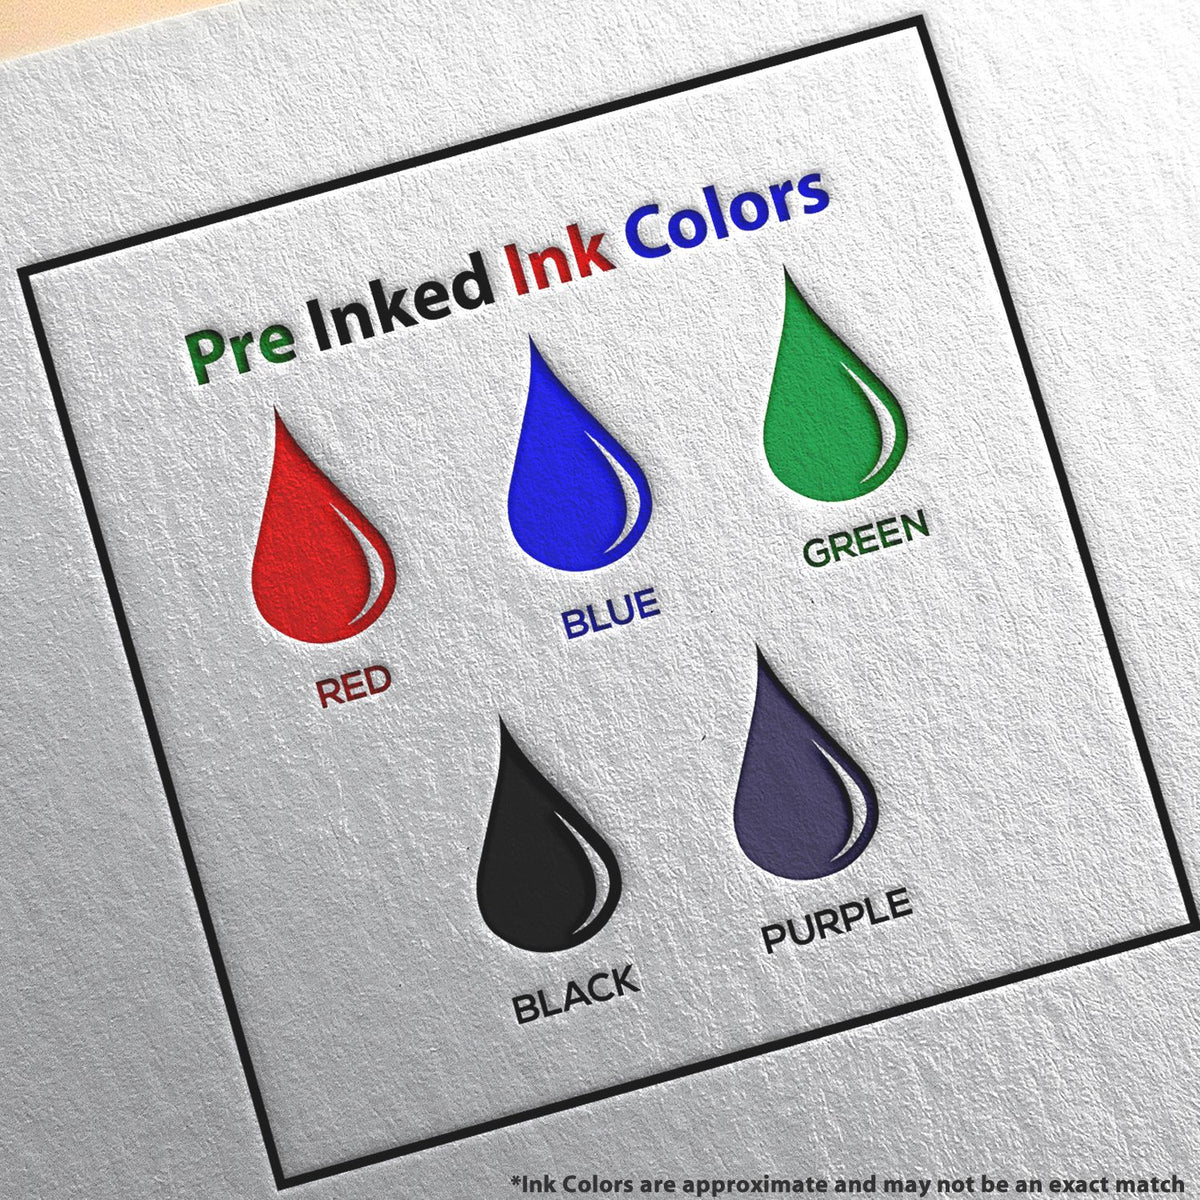 A picture showing the different ink colors or hues available for the Super Slim Utah Notary Public Stamp product.